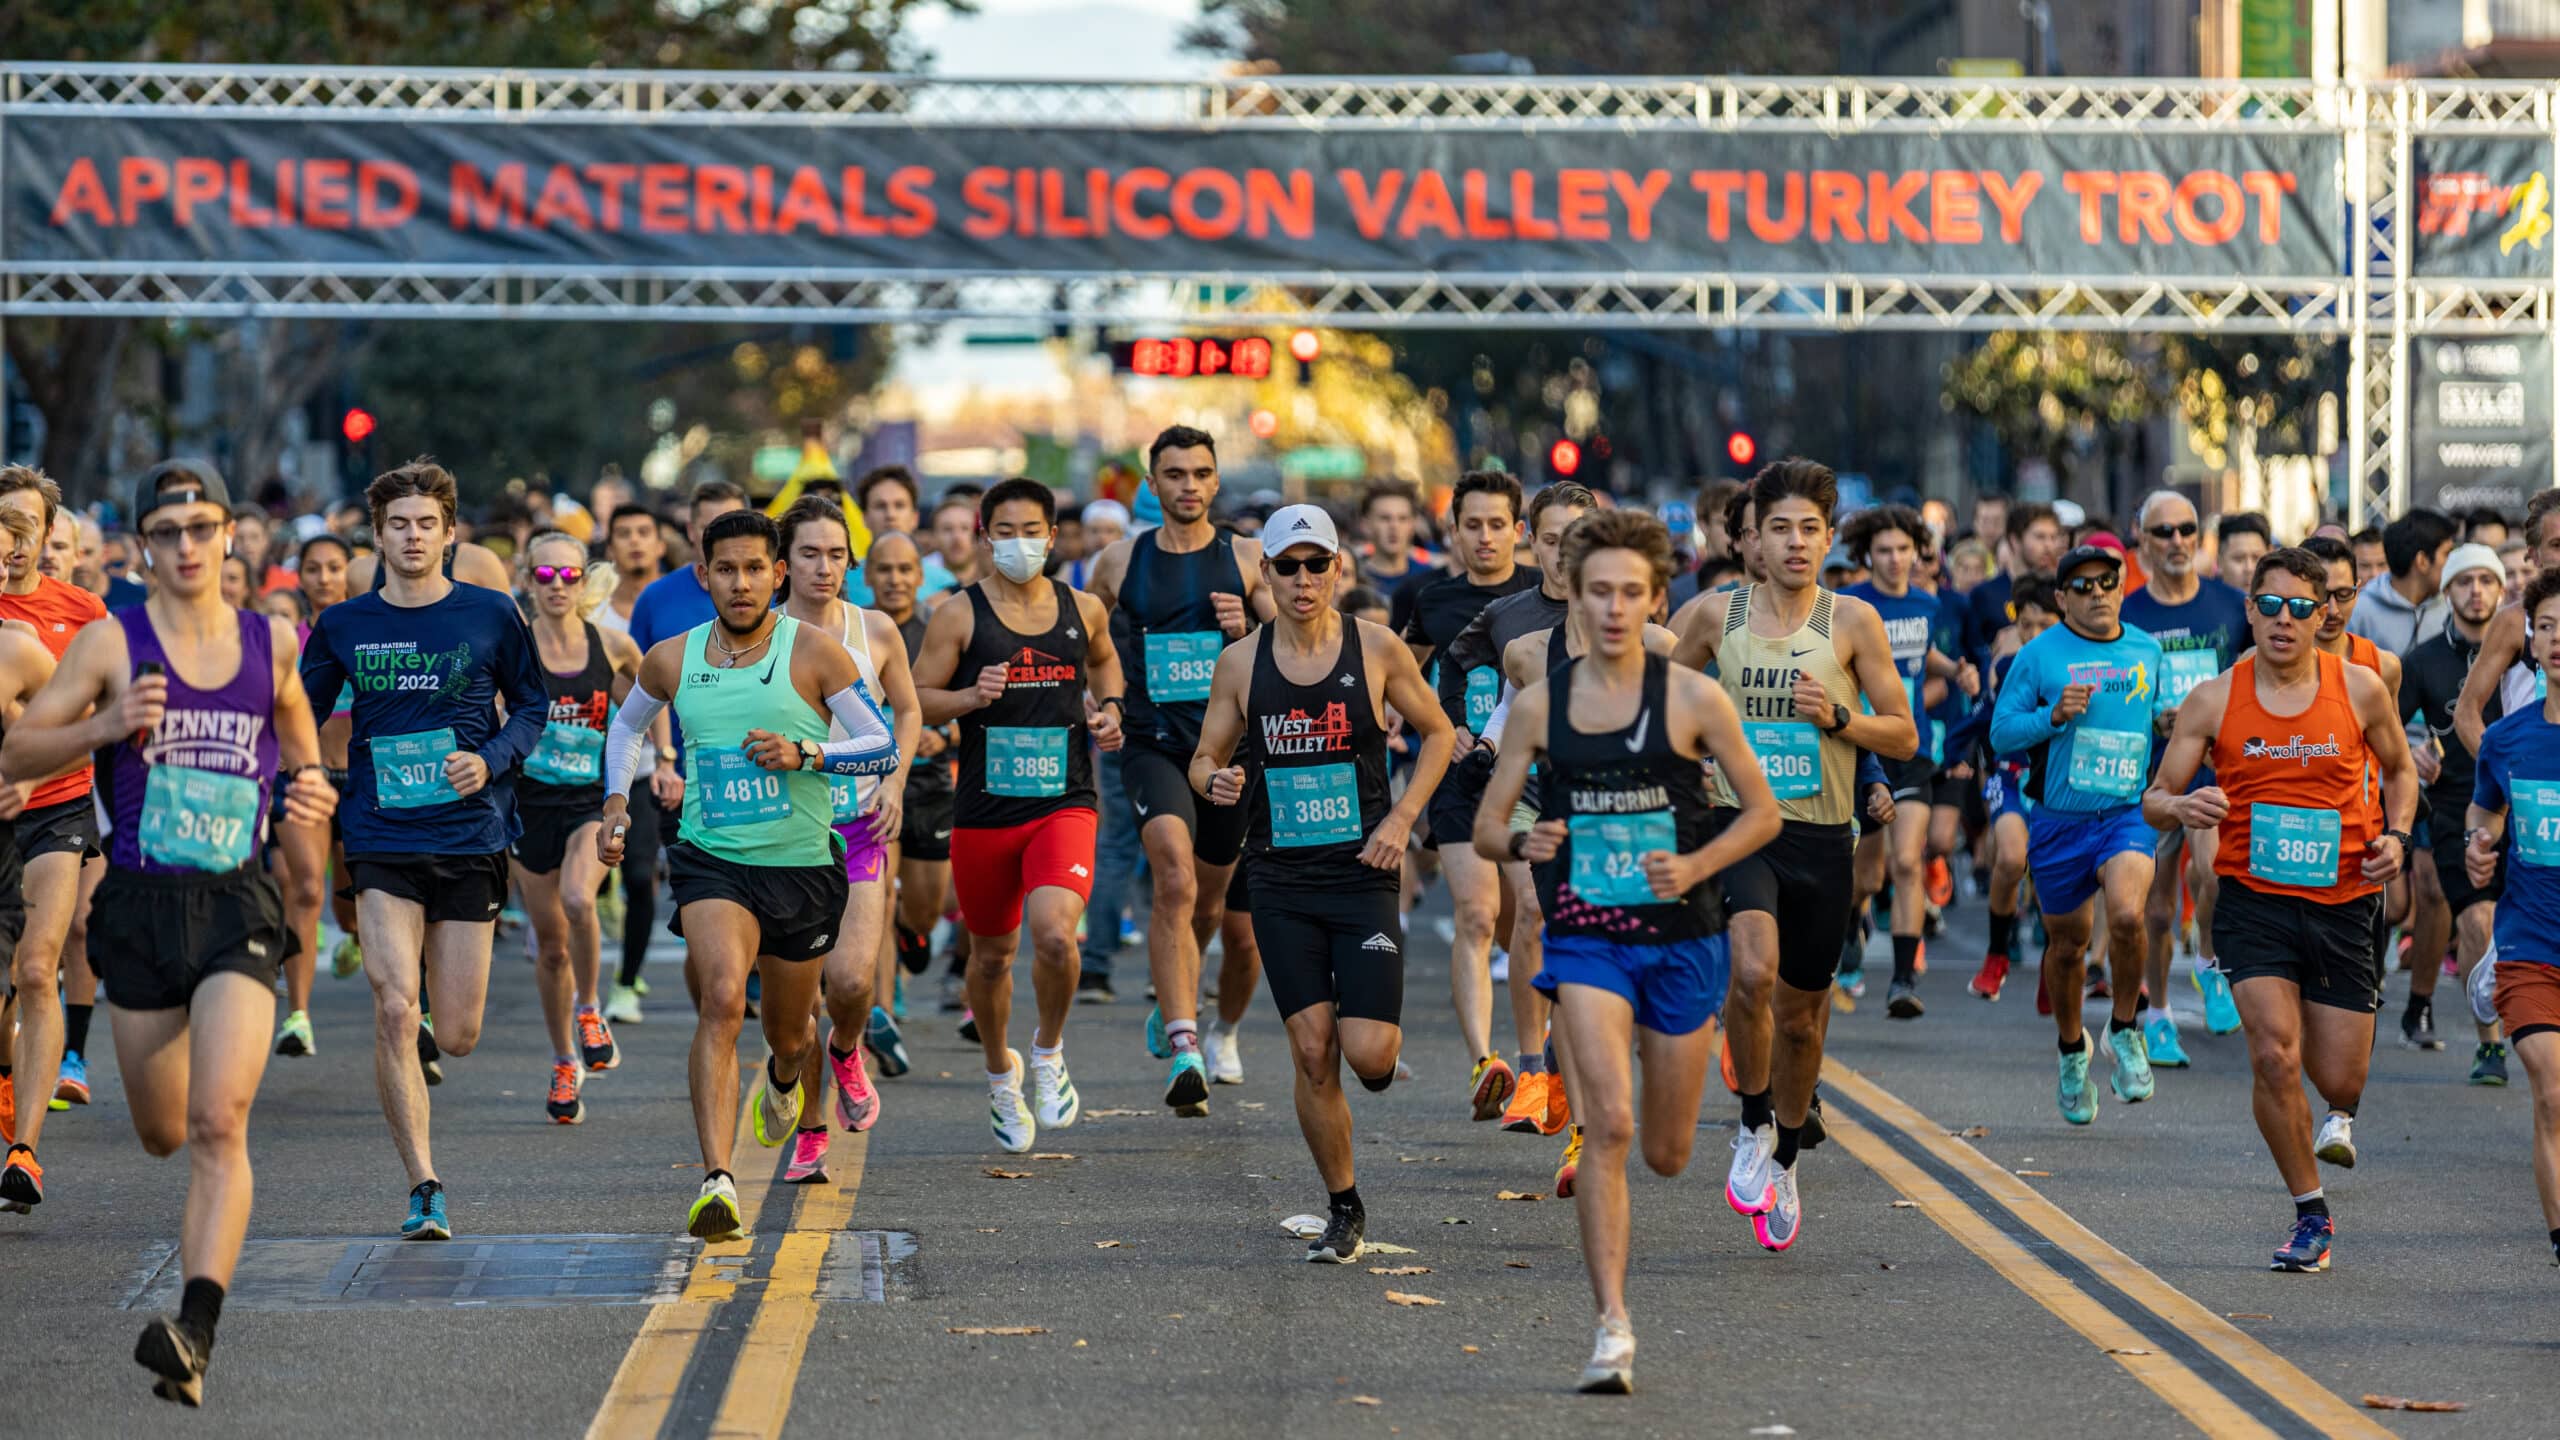 2023 Applied Materials Silicon Valley Turkey Trot Returns for its 19th